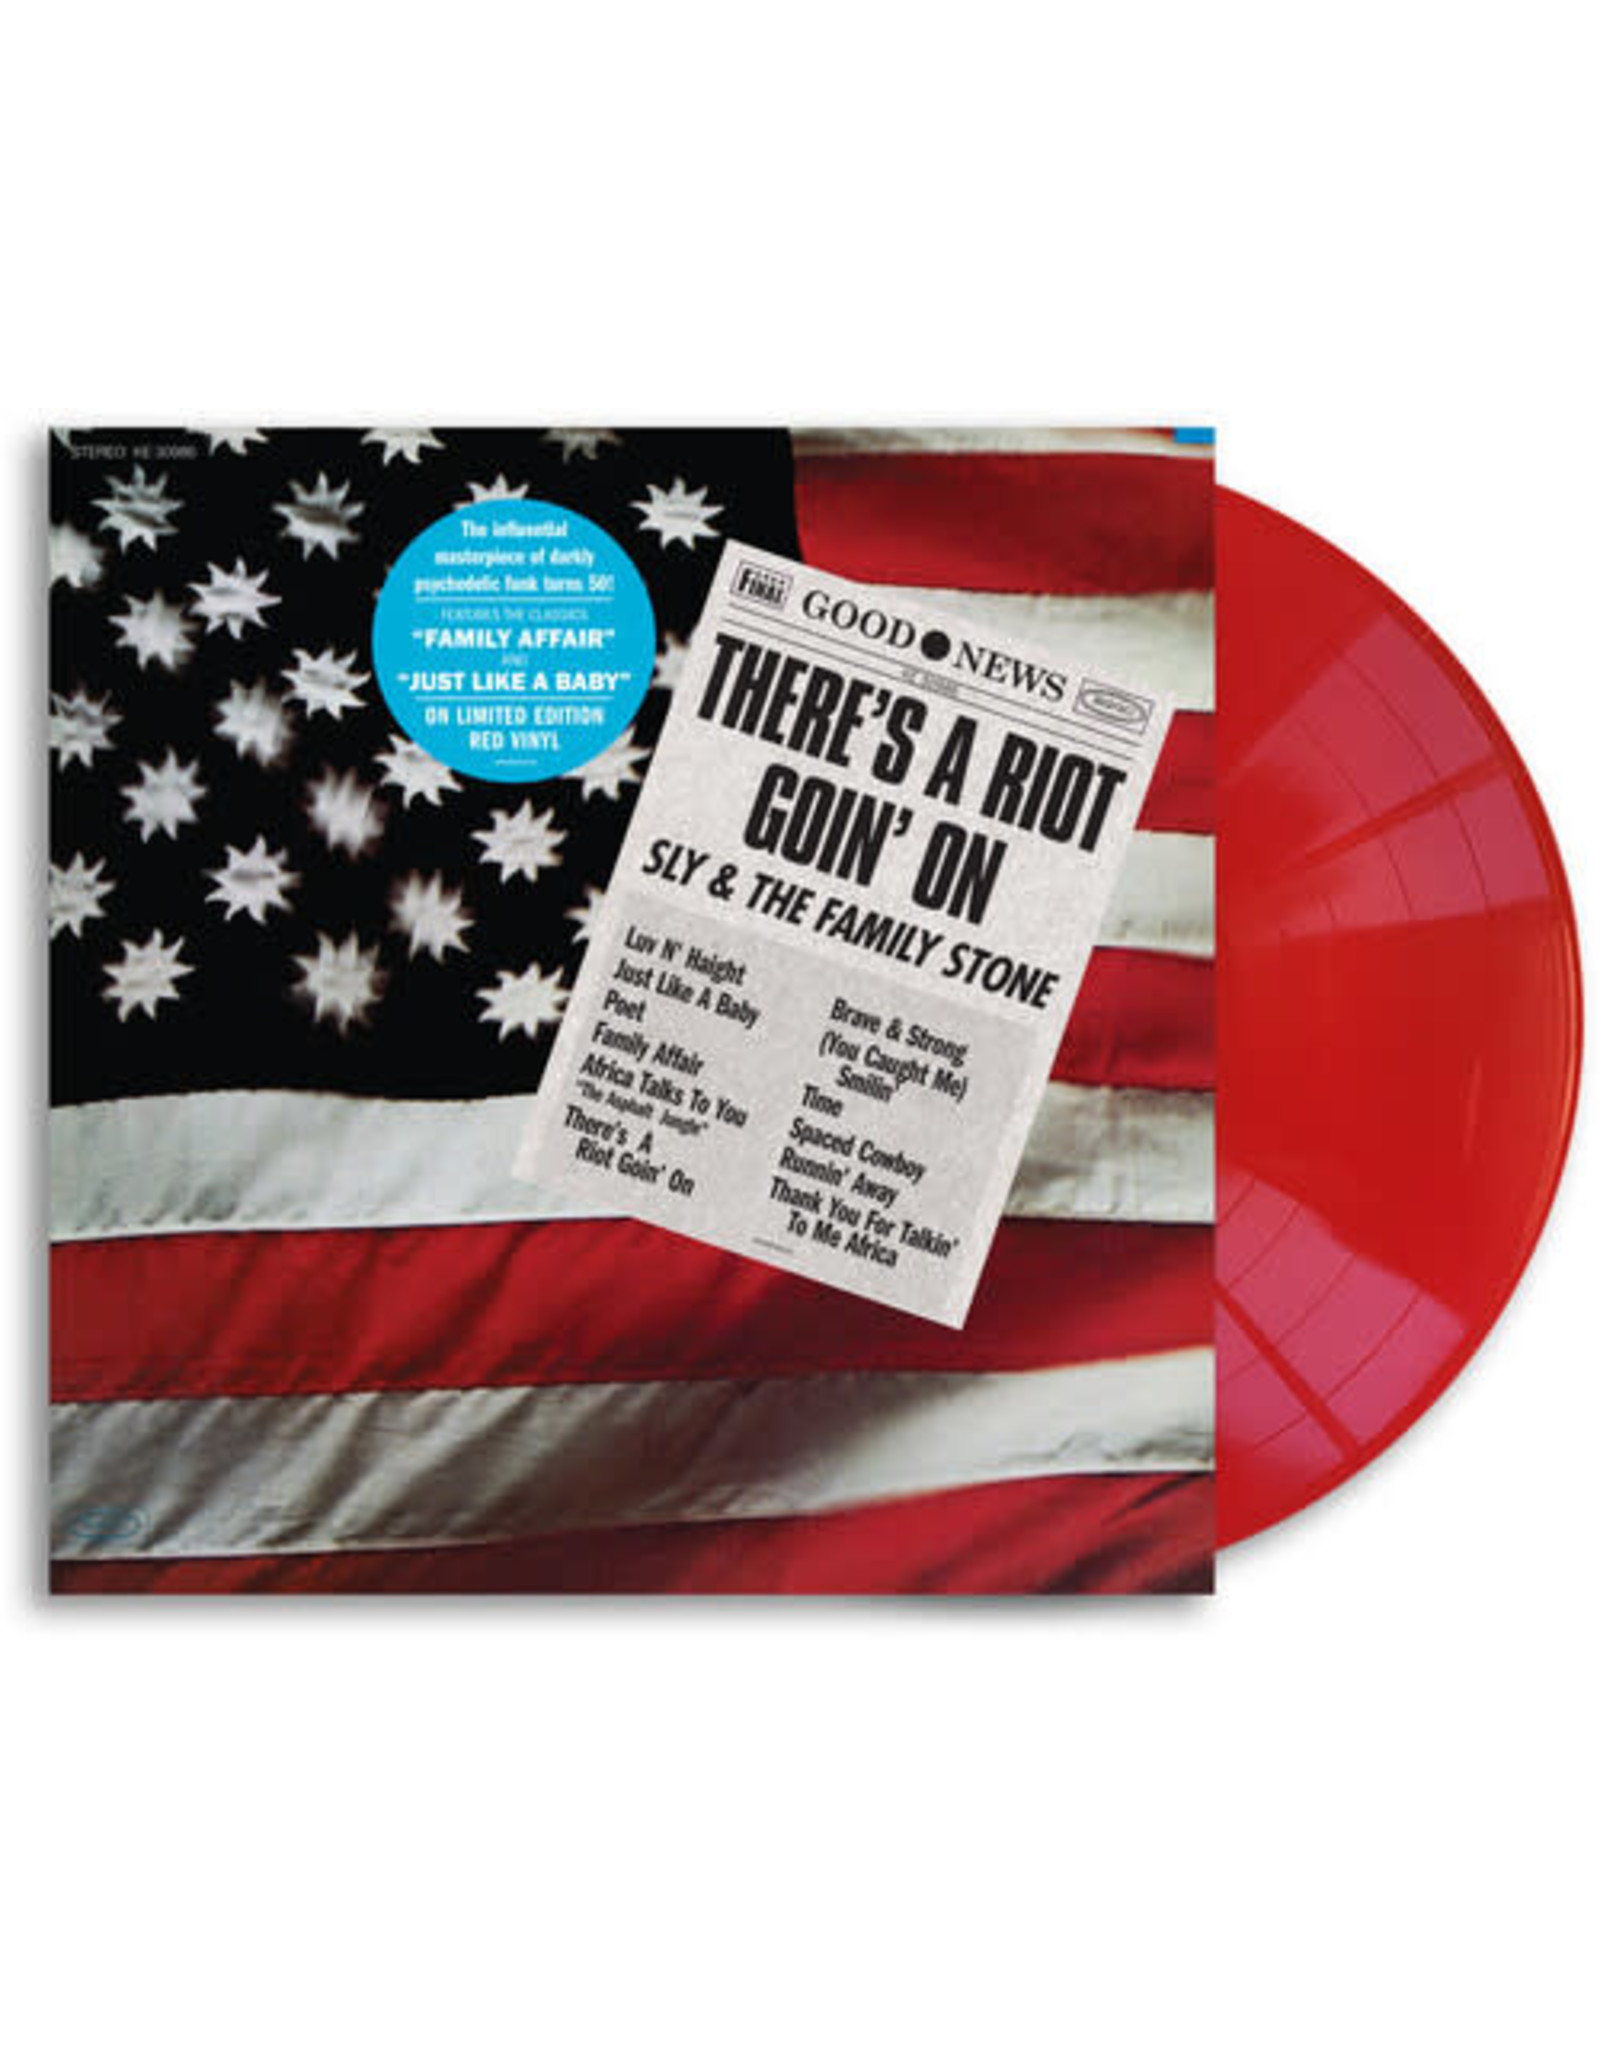 New Vinyl Sly & The Family Stone - There’s A Riot Going On (50th Anniversary, Colored) LP